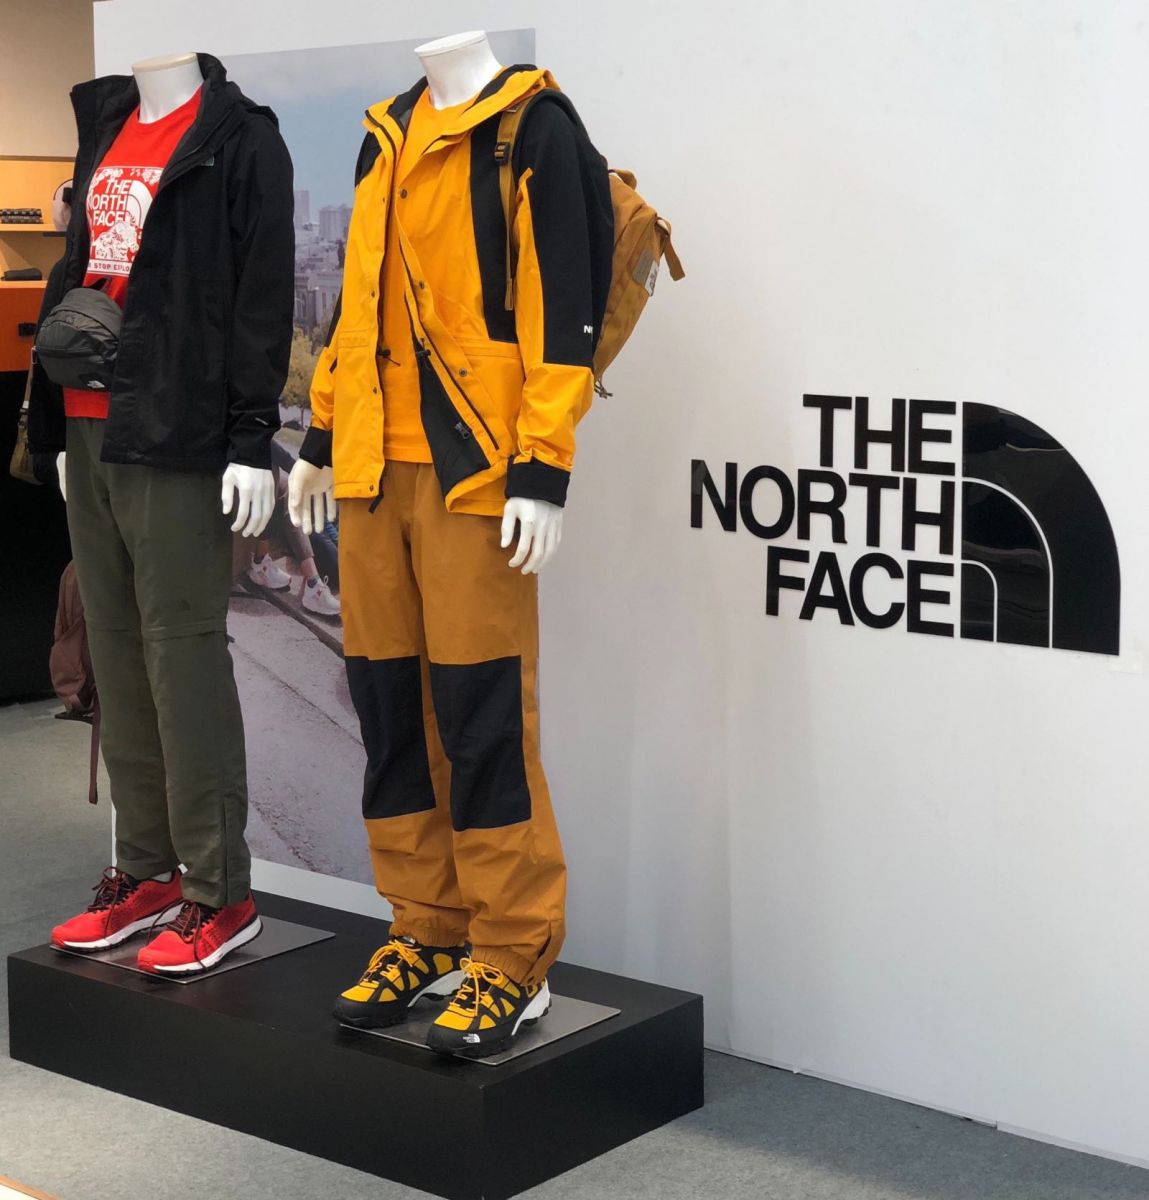 the north face, gian hàng the north face, lotte centre hà nội, lotte centre, trang phục thể thao